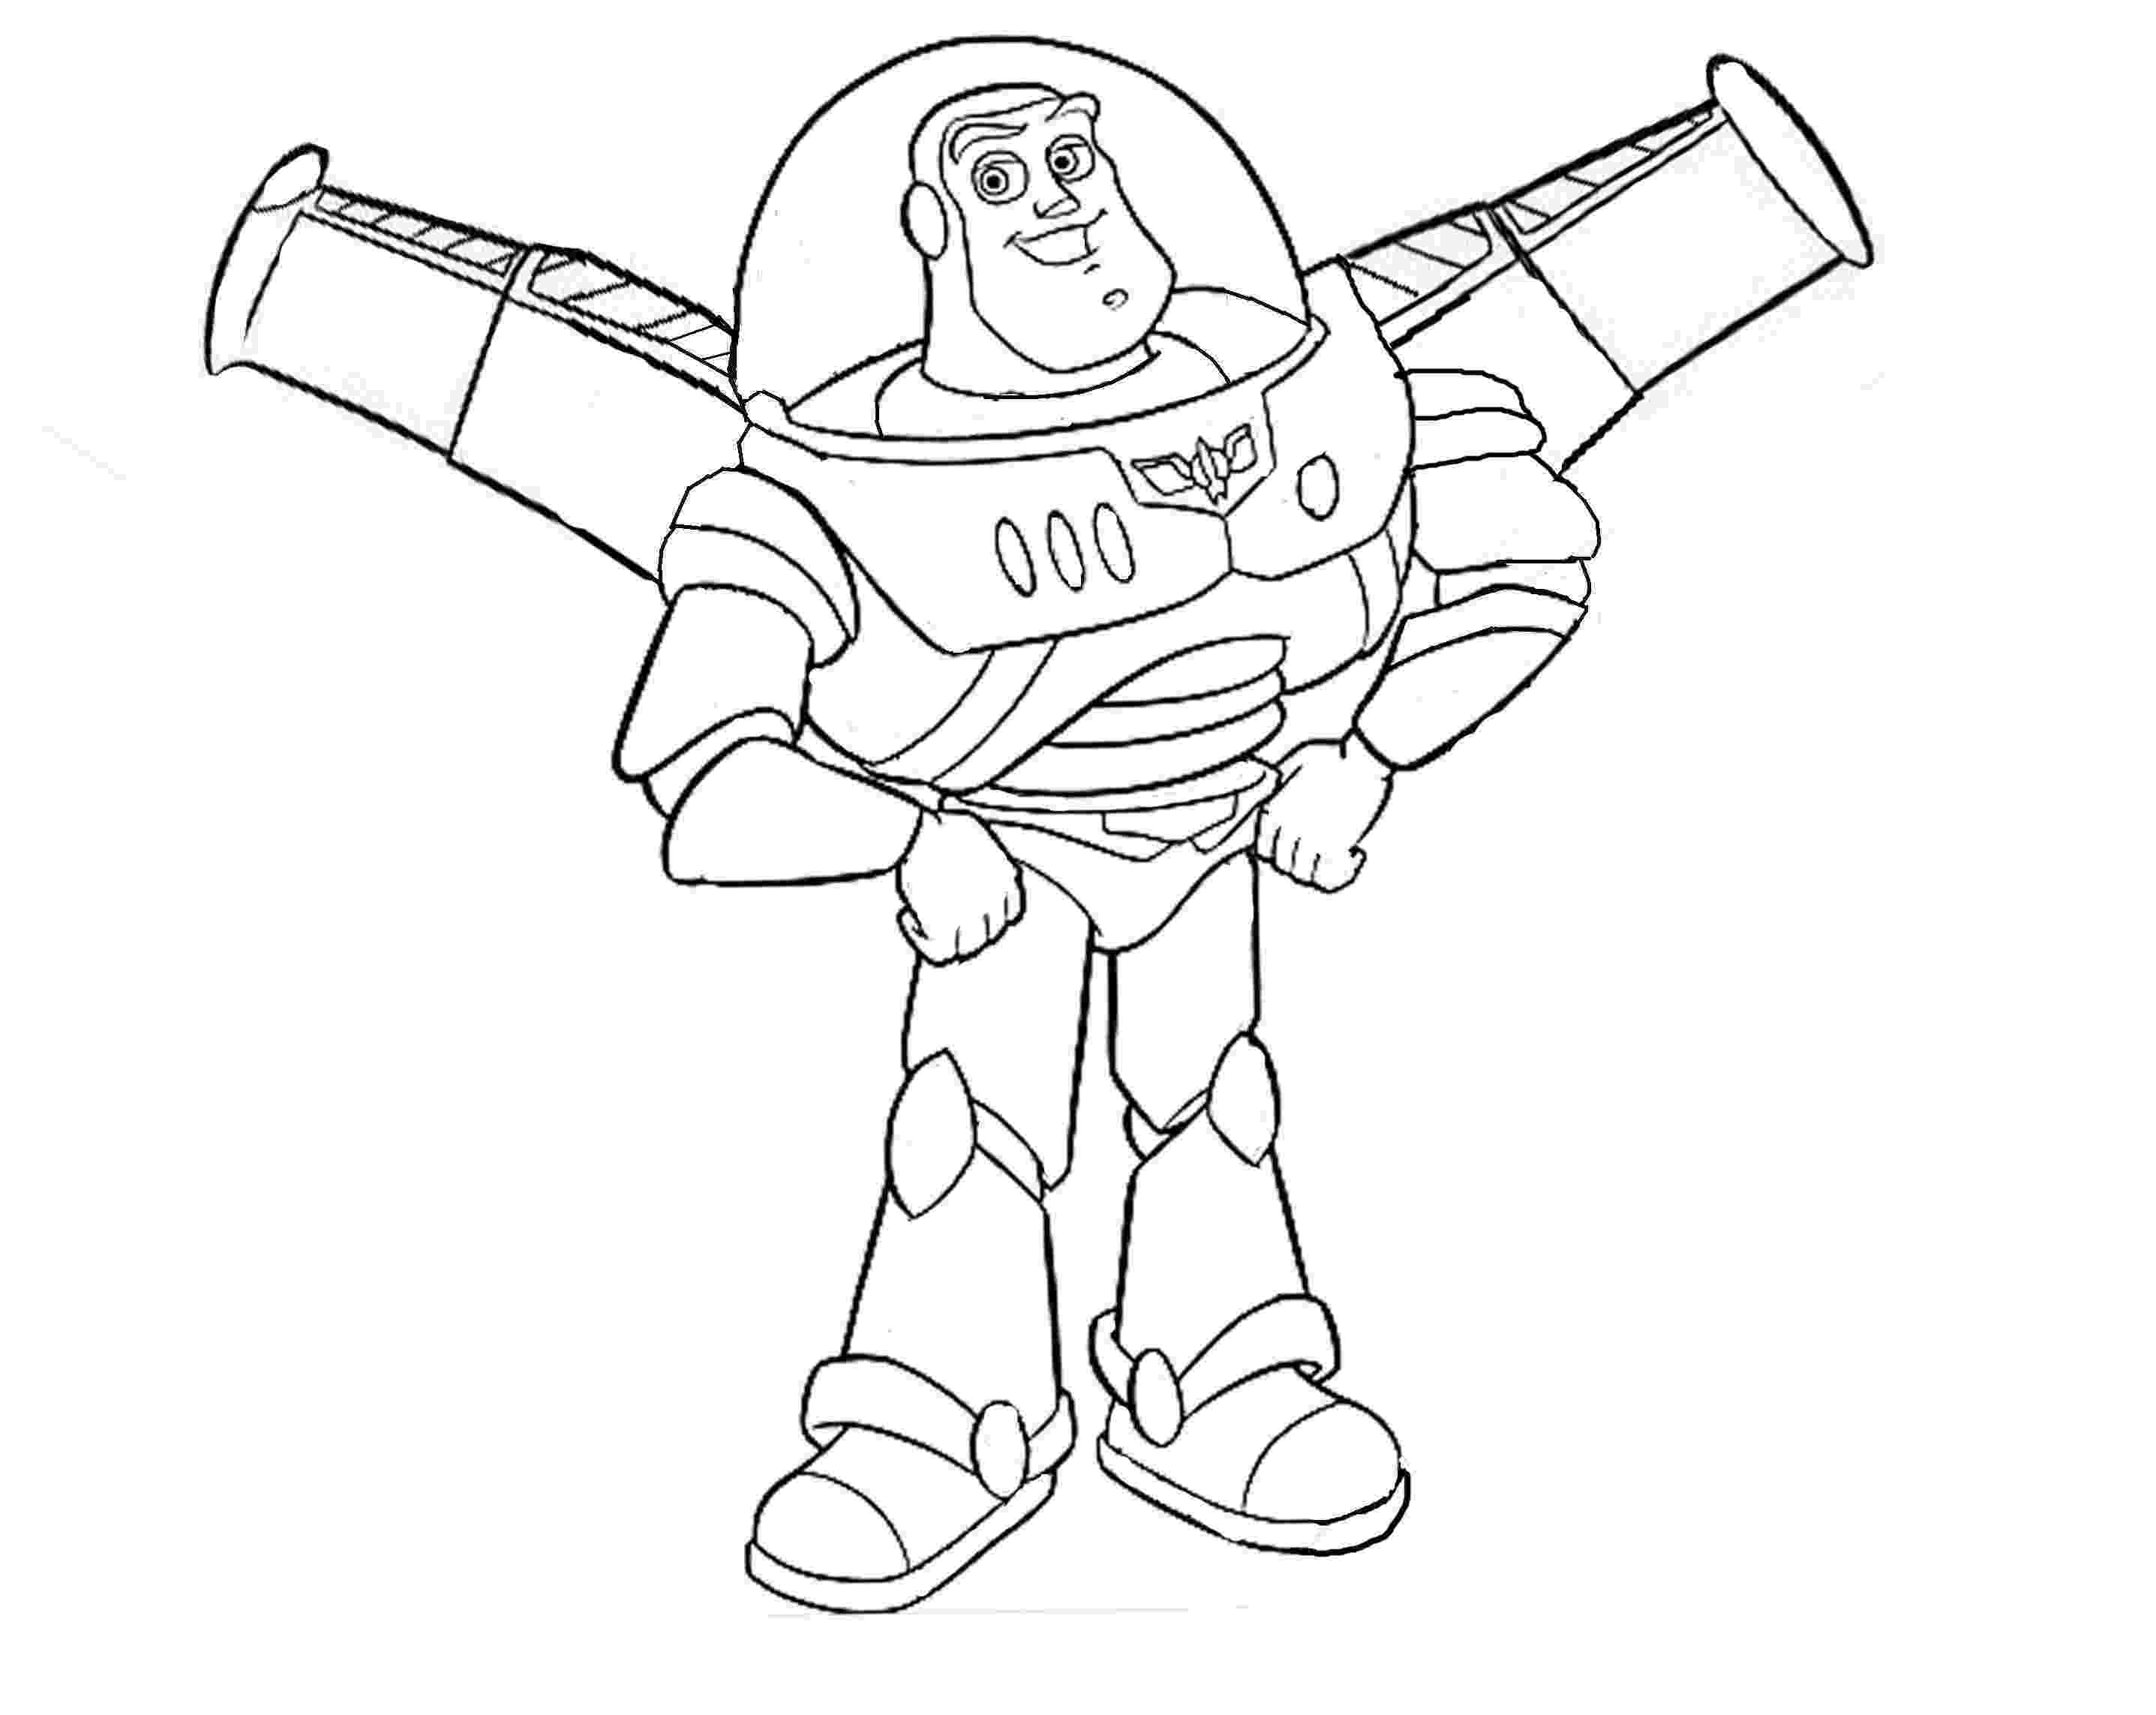 buzz lightyear coloring pages buzz lightyear with his wings toy story kids coloring pages pages buzz lightyear coloring 